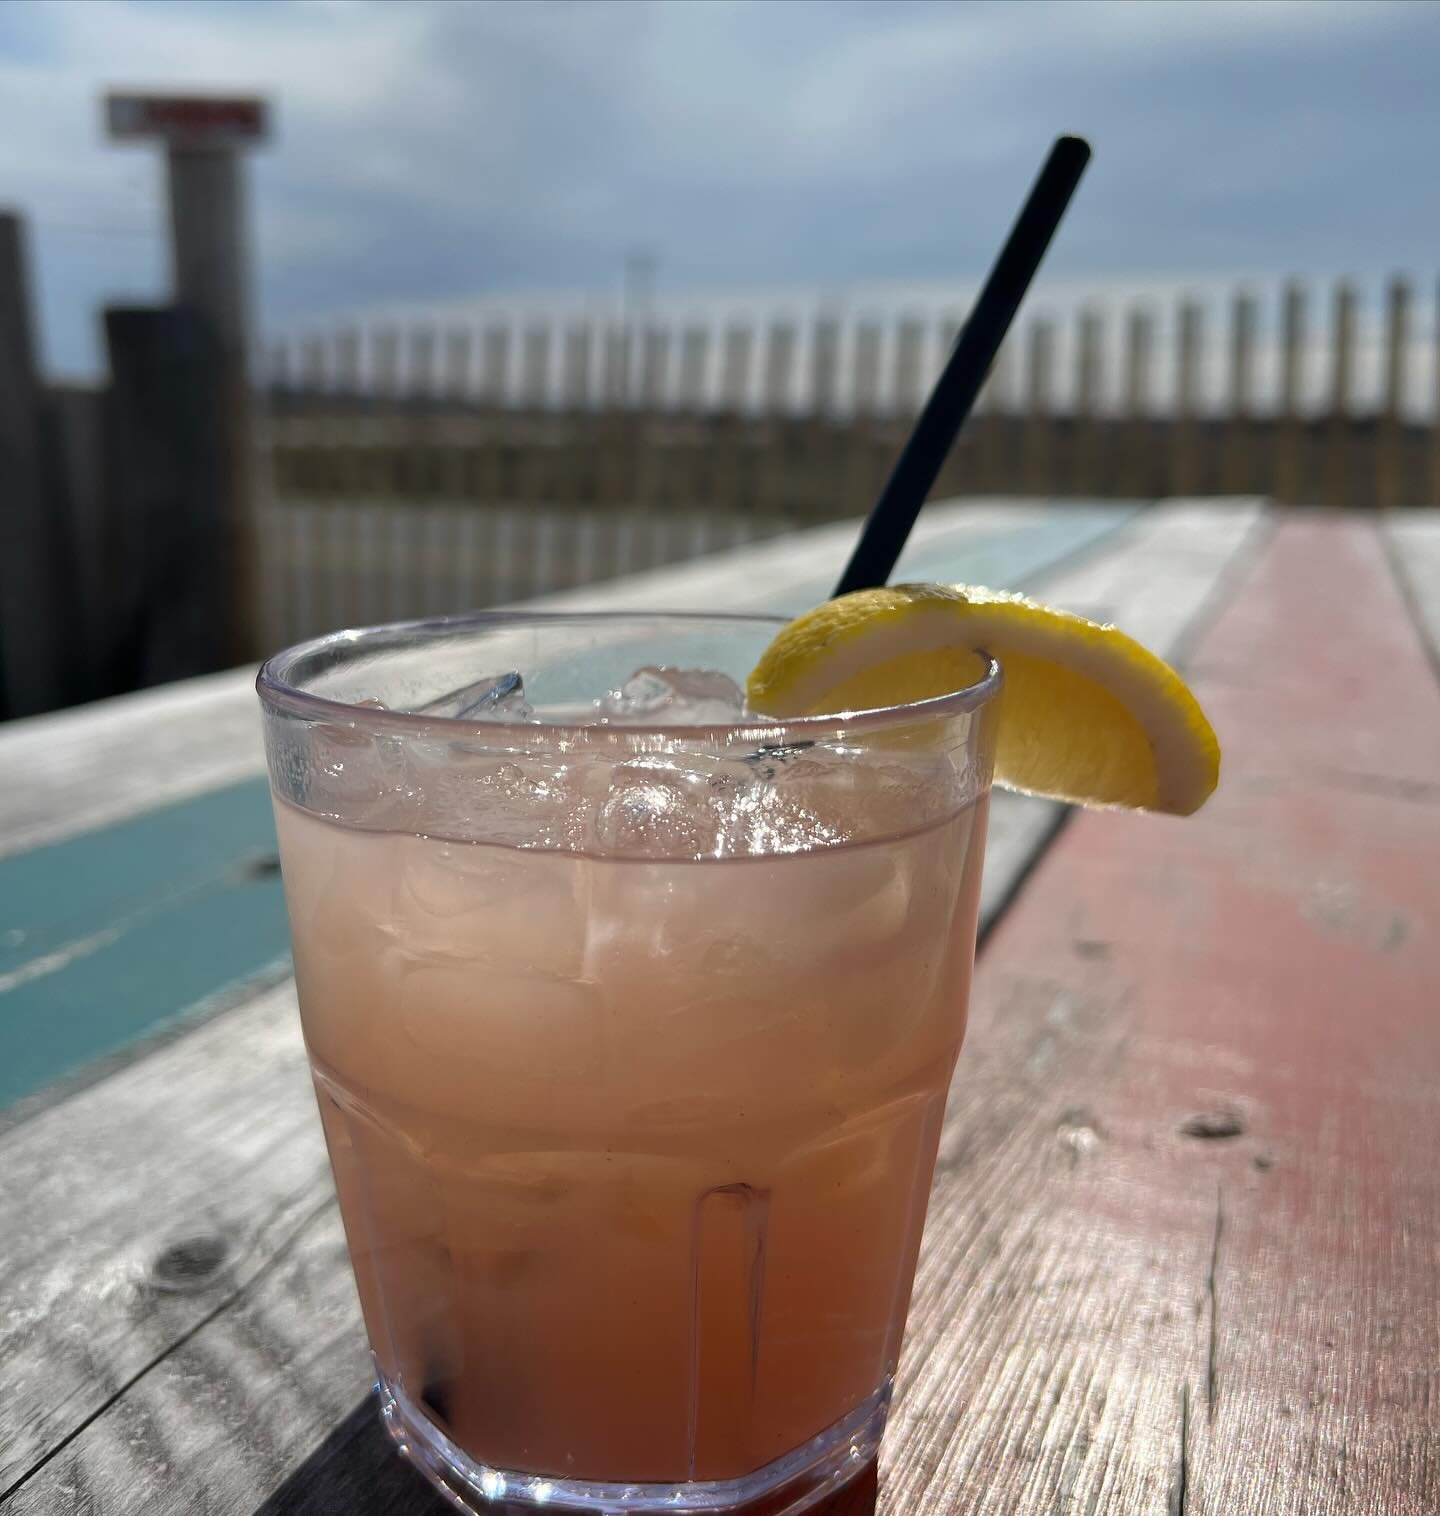 The &lsquo;Peach Coma&rsquo;! It&rsquo;s Friday night and a great day to remember an old island friend with our new drink in their honor!  @greygoose peach rosemary with white peach lemonade! 
*
*
*
#sunsetclub #plumisland #weremember #iykyk #cocktai